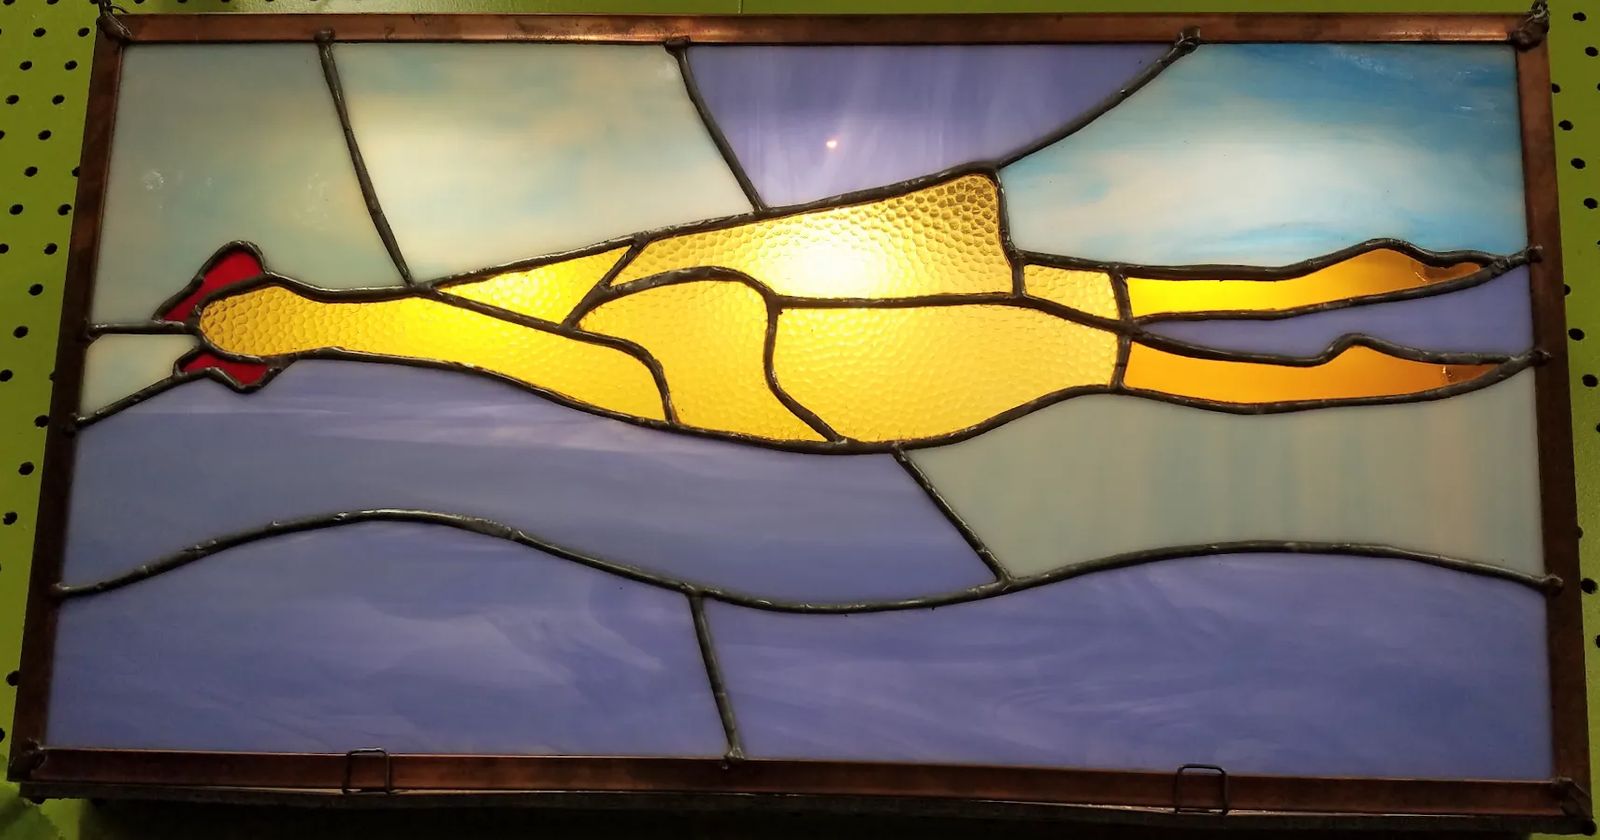 A Photo A stained-glass representation of a rubber chicken in Archie McPhee's world-famous rubber chicken museum in Seattle, Washington